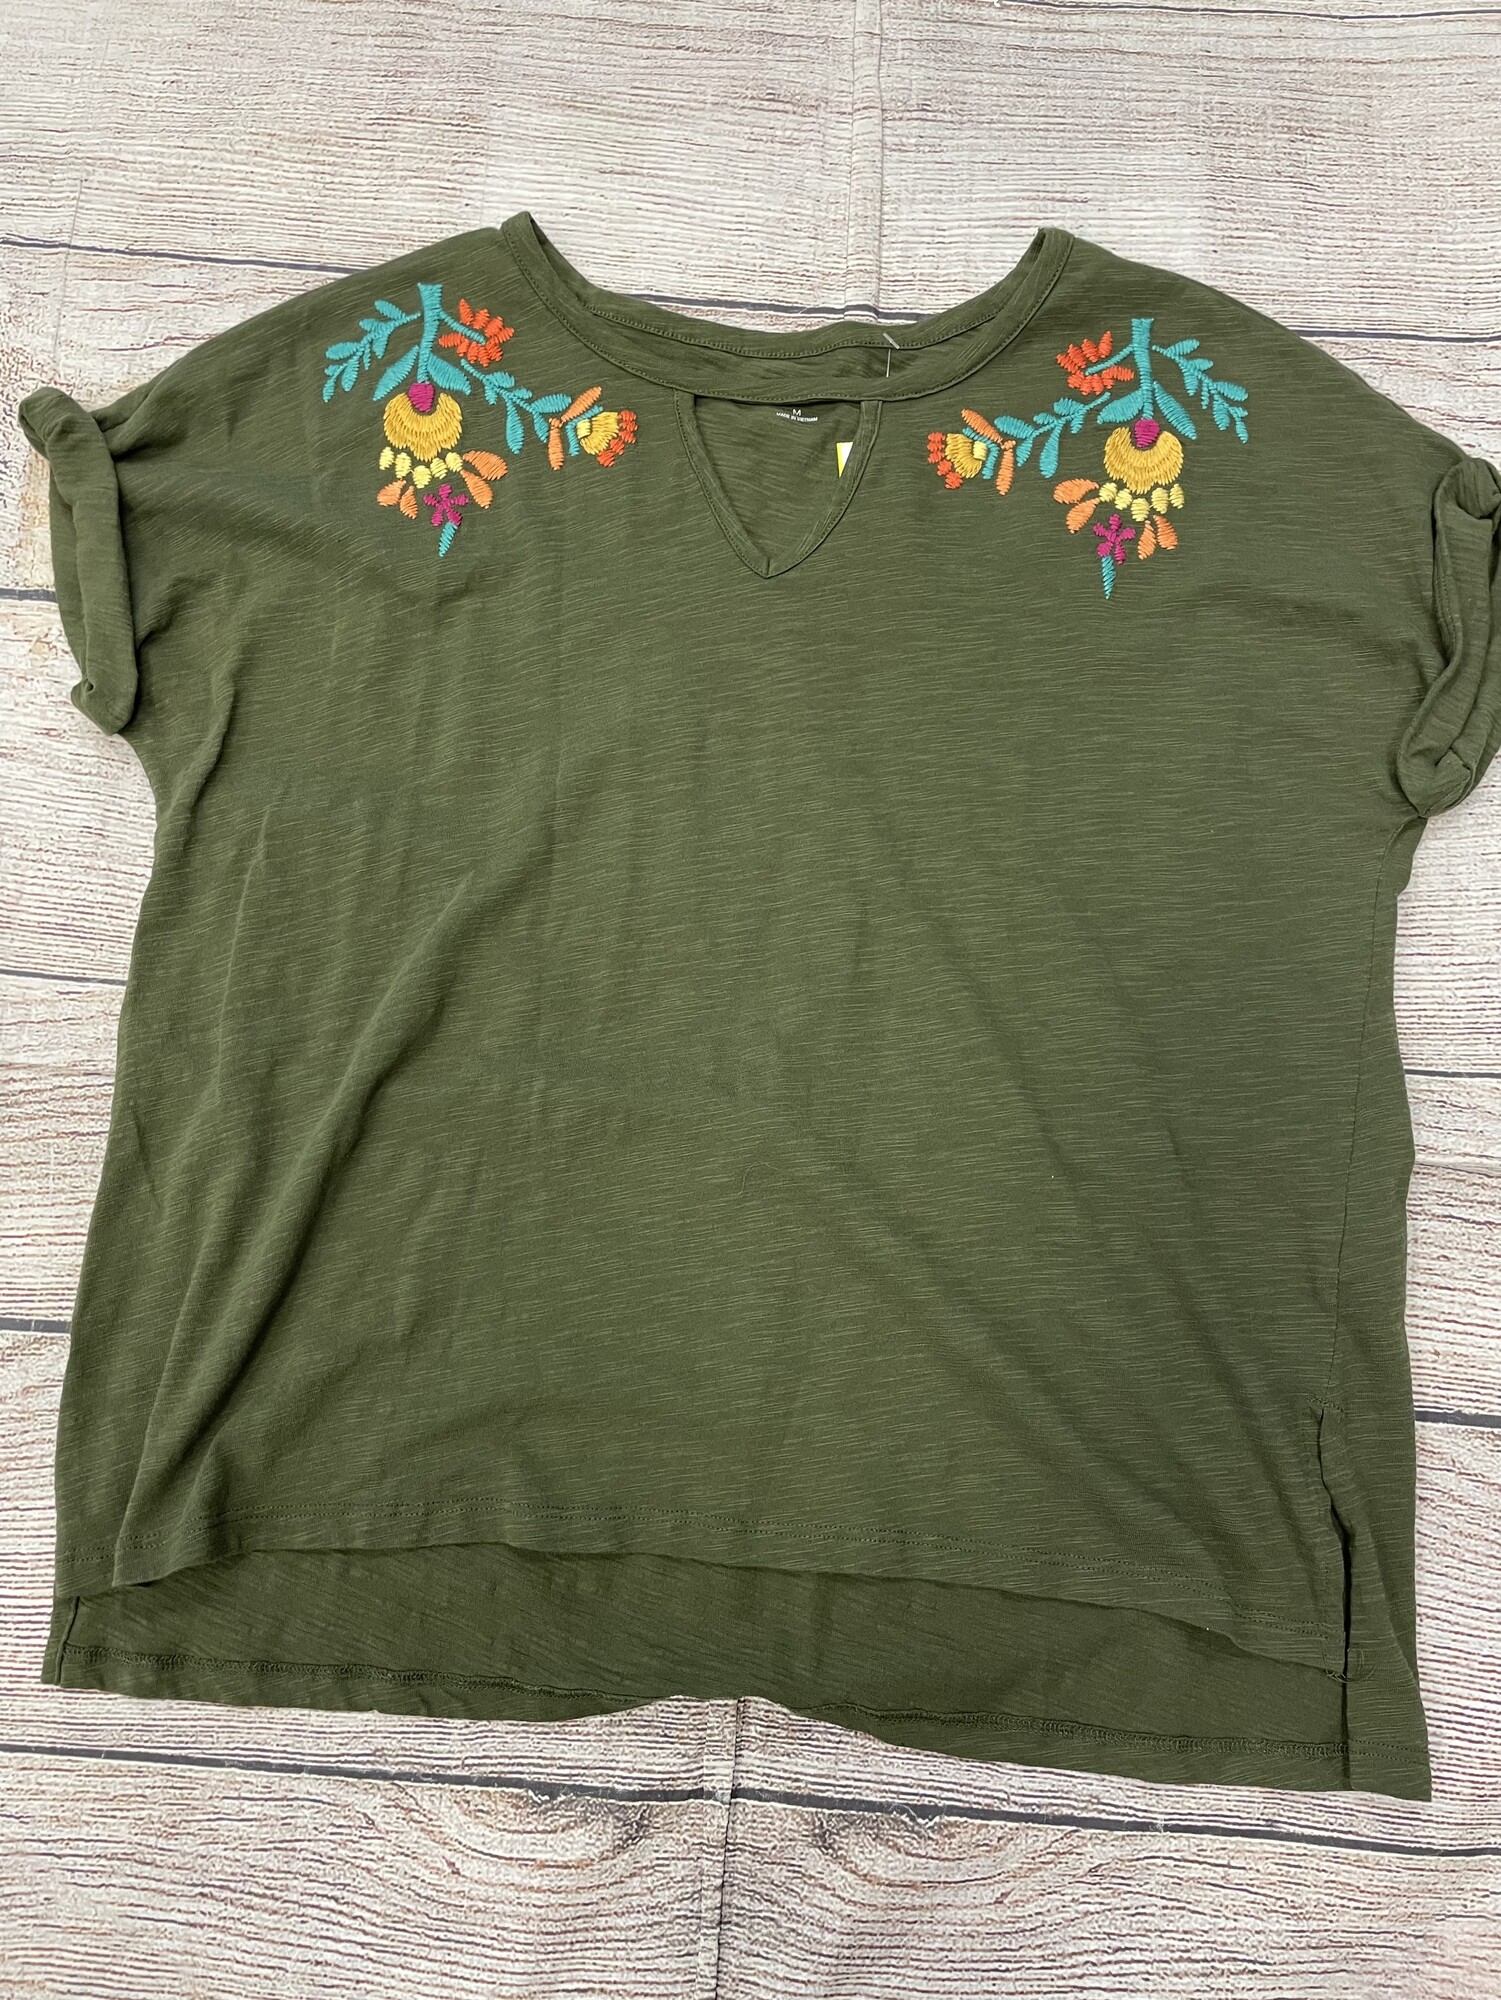 Ana Top, SS, Camo Green, Floral Embroidery on the Front of the Shoulders, Rolled Cuff Sleeves, Size: Medium